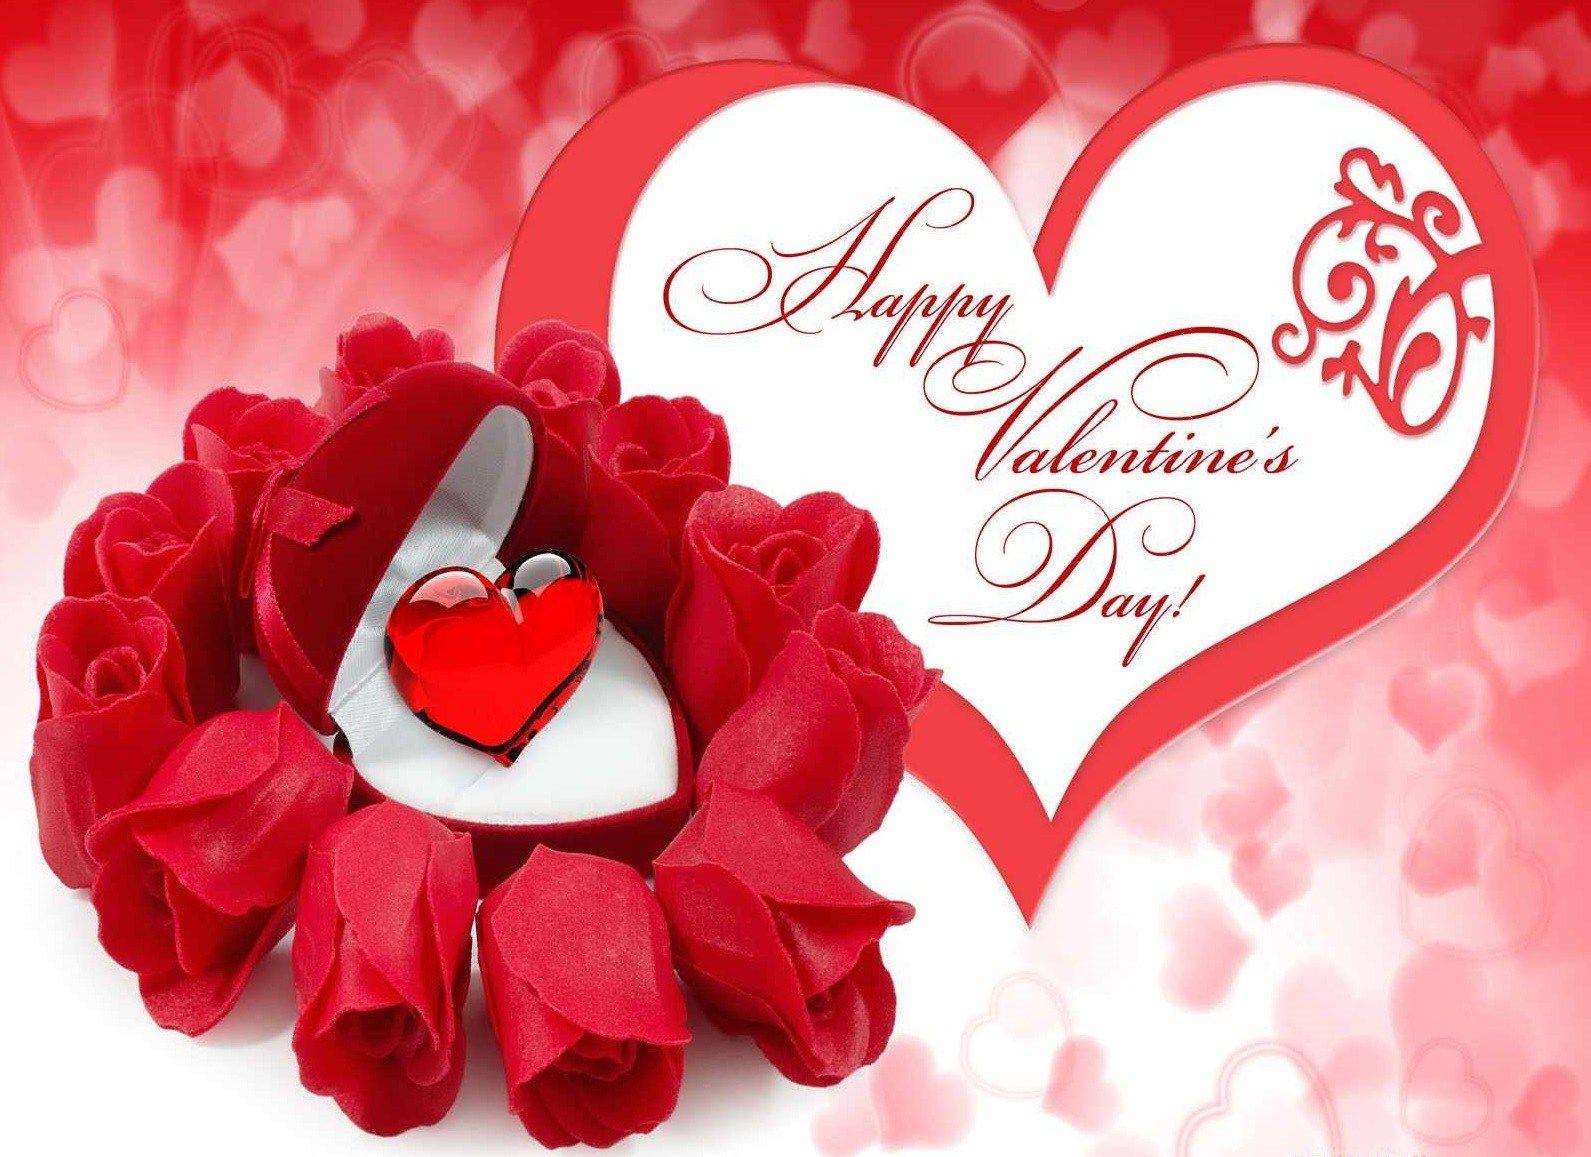 Happy Valentines day Wishes Image Quotes Messages HD Wallpaper